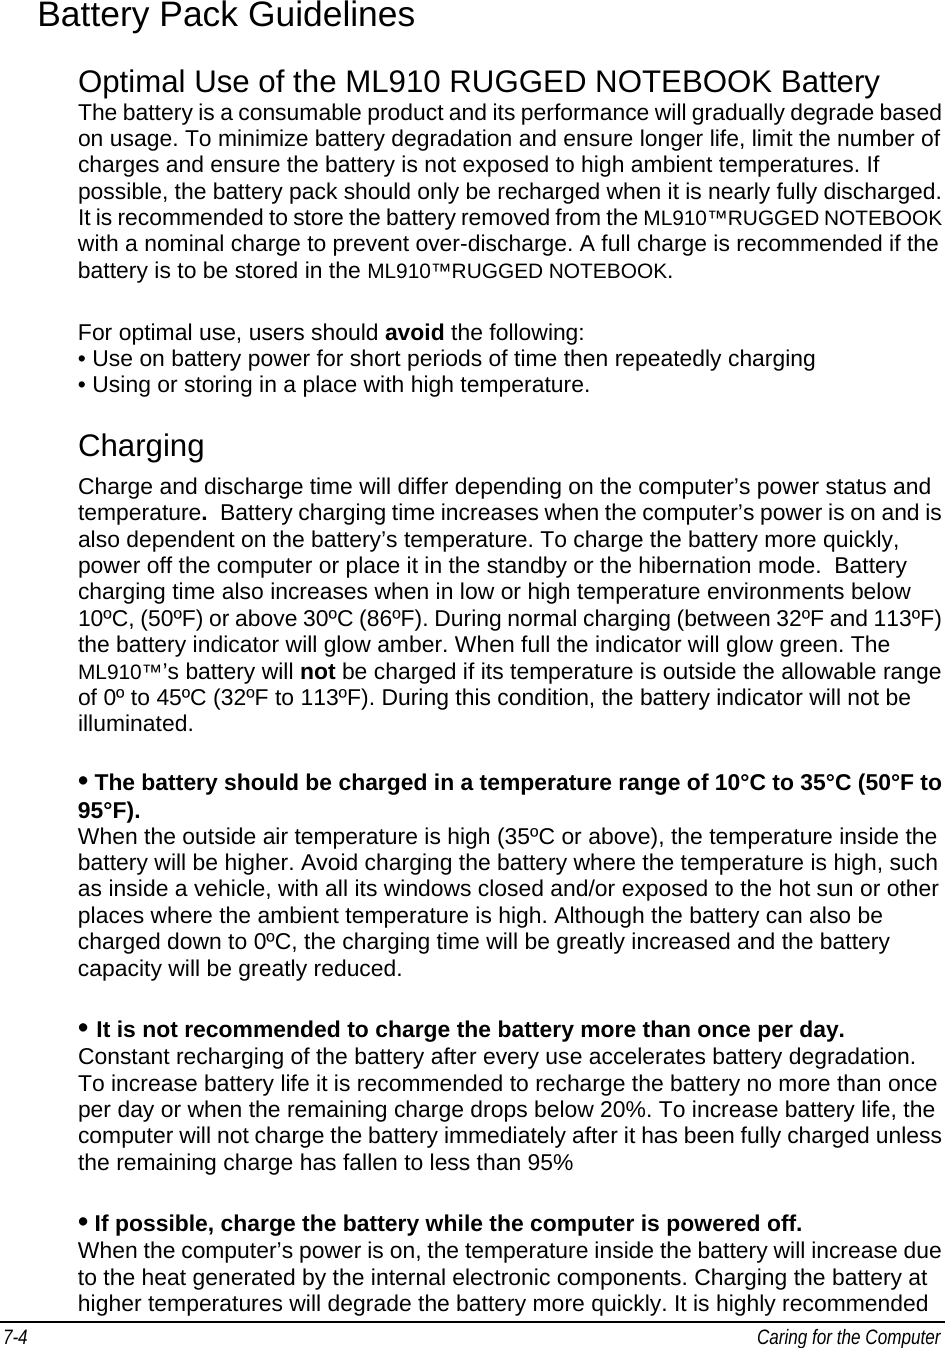 7-4   Caring for the Computer Battery Pack Guidelines Optimal Use of the ML910 RUGGED NOTEBOOK Battery  The battery is a consumable product and its performance will gradually degrade based on usage. To minimize battery degradation and ensure longer life, limit the number of charges and ensure the battery is not exposed to high ambient temperatures. If possible, the battery pack should only be recharged when it is nearly fully discharged. It is recommended to store the battery removed from the ML910™RUGGED NOTEBOOK with a nominal charge to prevent over-discharge. A full charge is recommended if the battery is to be stored in the ML910™RUGGED NOTEBOOK. For optimal use, users should avoid the following:  • Use on battery power for short periods of time then repeatedly charging  • Using or storing in a place with high temperature.  Charging Charge and discharge time will differ depending on the computer’s power status and temperature.  Battery charging time increases when the computer’s power is on and is also dependent on the battery’s temperature. To charge the battery more quickly, power off the computer or place it in the standby or the hibernation mode.  Battery charging time also increases when in low or high temperature environments below 10ºC, (50ºF) or above 30ºC (86ºF). During normal charging (between 32ºF and 113ºF) the battery indicator will glow amber. When full the indicator will glow green. The ML910™’s battery will not be charged if its temperature is outside the allowable range of 0º to 45ºC (32ºF to 113ºF). During this condition, the battery indicator will not be illuminated.  • The battery should be charged in a temperature range of 10°C to 35°C (50°F to 95°F).  When the outside air temperature is high (35ºC or above), the temperature inside the battery will be higher. Avoid charging the battery where the temperature is high, such as inside a vehicle, with all its windows closed and/or exposed to the hot sun or other places where the ambient temperature is high. Although the battery can also be charged down to 0ºC, the charging time will be greatly increased and the battery capacity will be greatly reduced.  • It is not recommended to charge the battery more than once per day.  Constant recharging of the battery after every use accelerates battery degradation.  To increase battery life it is recommended to recharge the battery no more than once per day or when the remaining charge drops below 20%. To increase battery life, the computer will not charge the battery immediately after it has been fully charged unless the remaining charge has fallen to less than 95%   • If possible, charge the battery while the computer is powered off. When the computer’s power is on, the temperature inside the battery will increase due to the heat generated by the internal electronic components. Charging the battery at higher temperatures will degrade the battery more quickly. It is highly recommended 